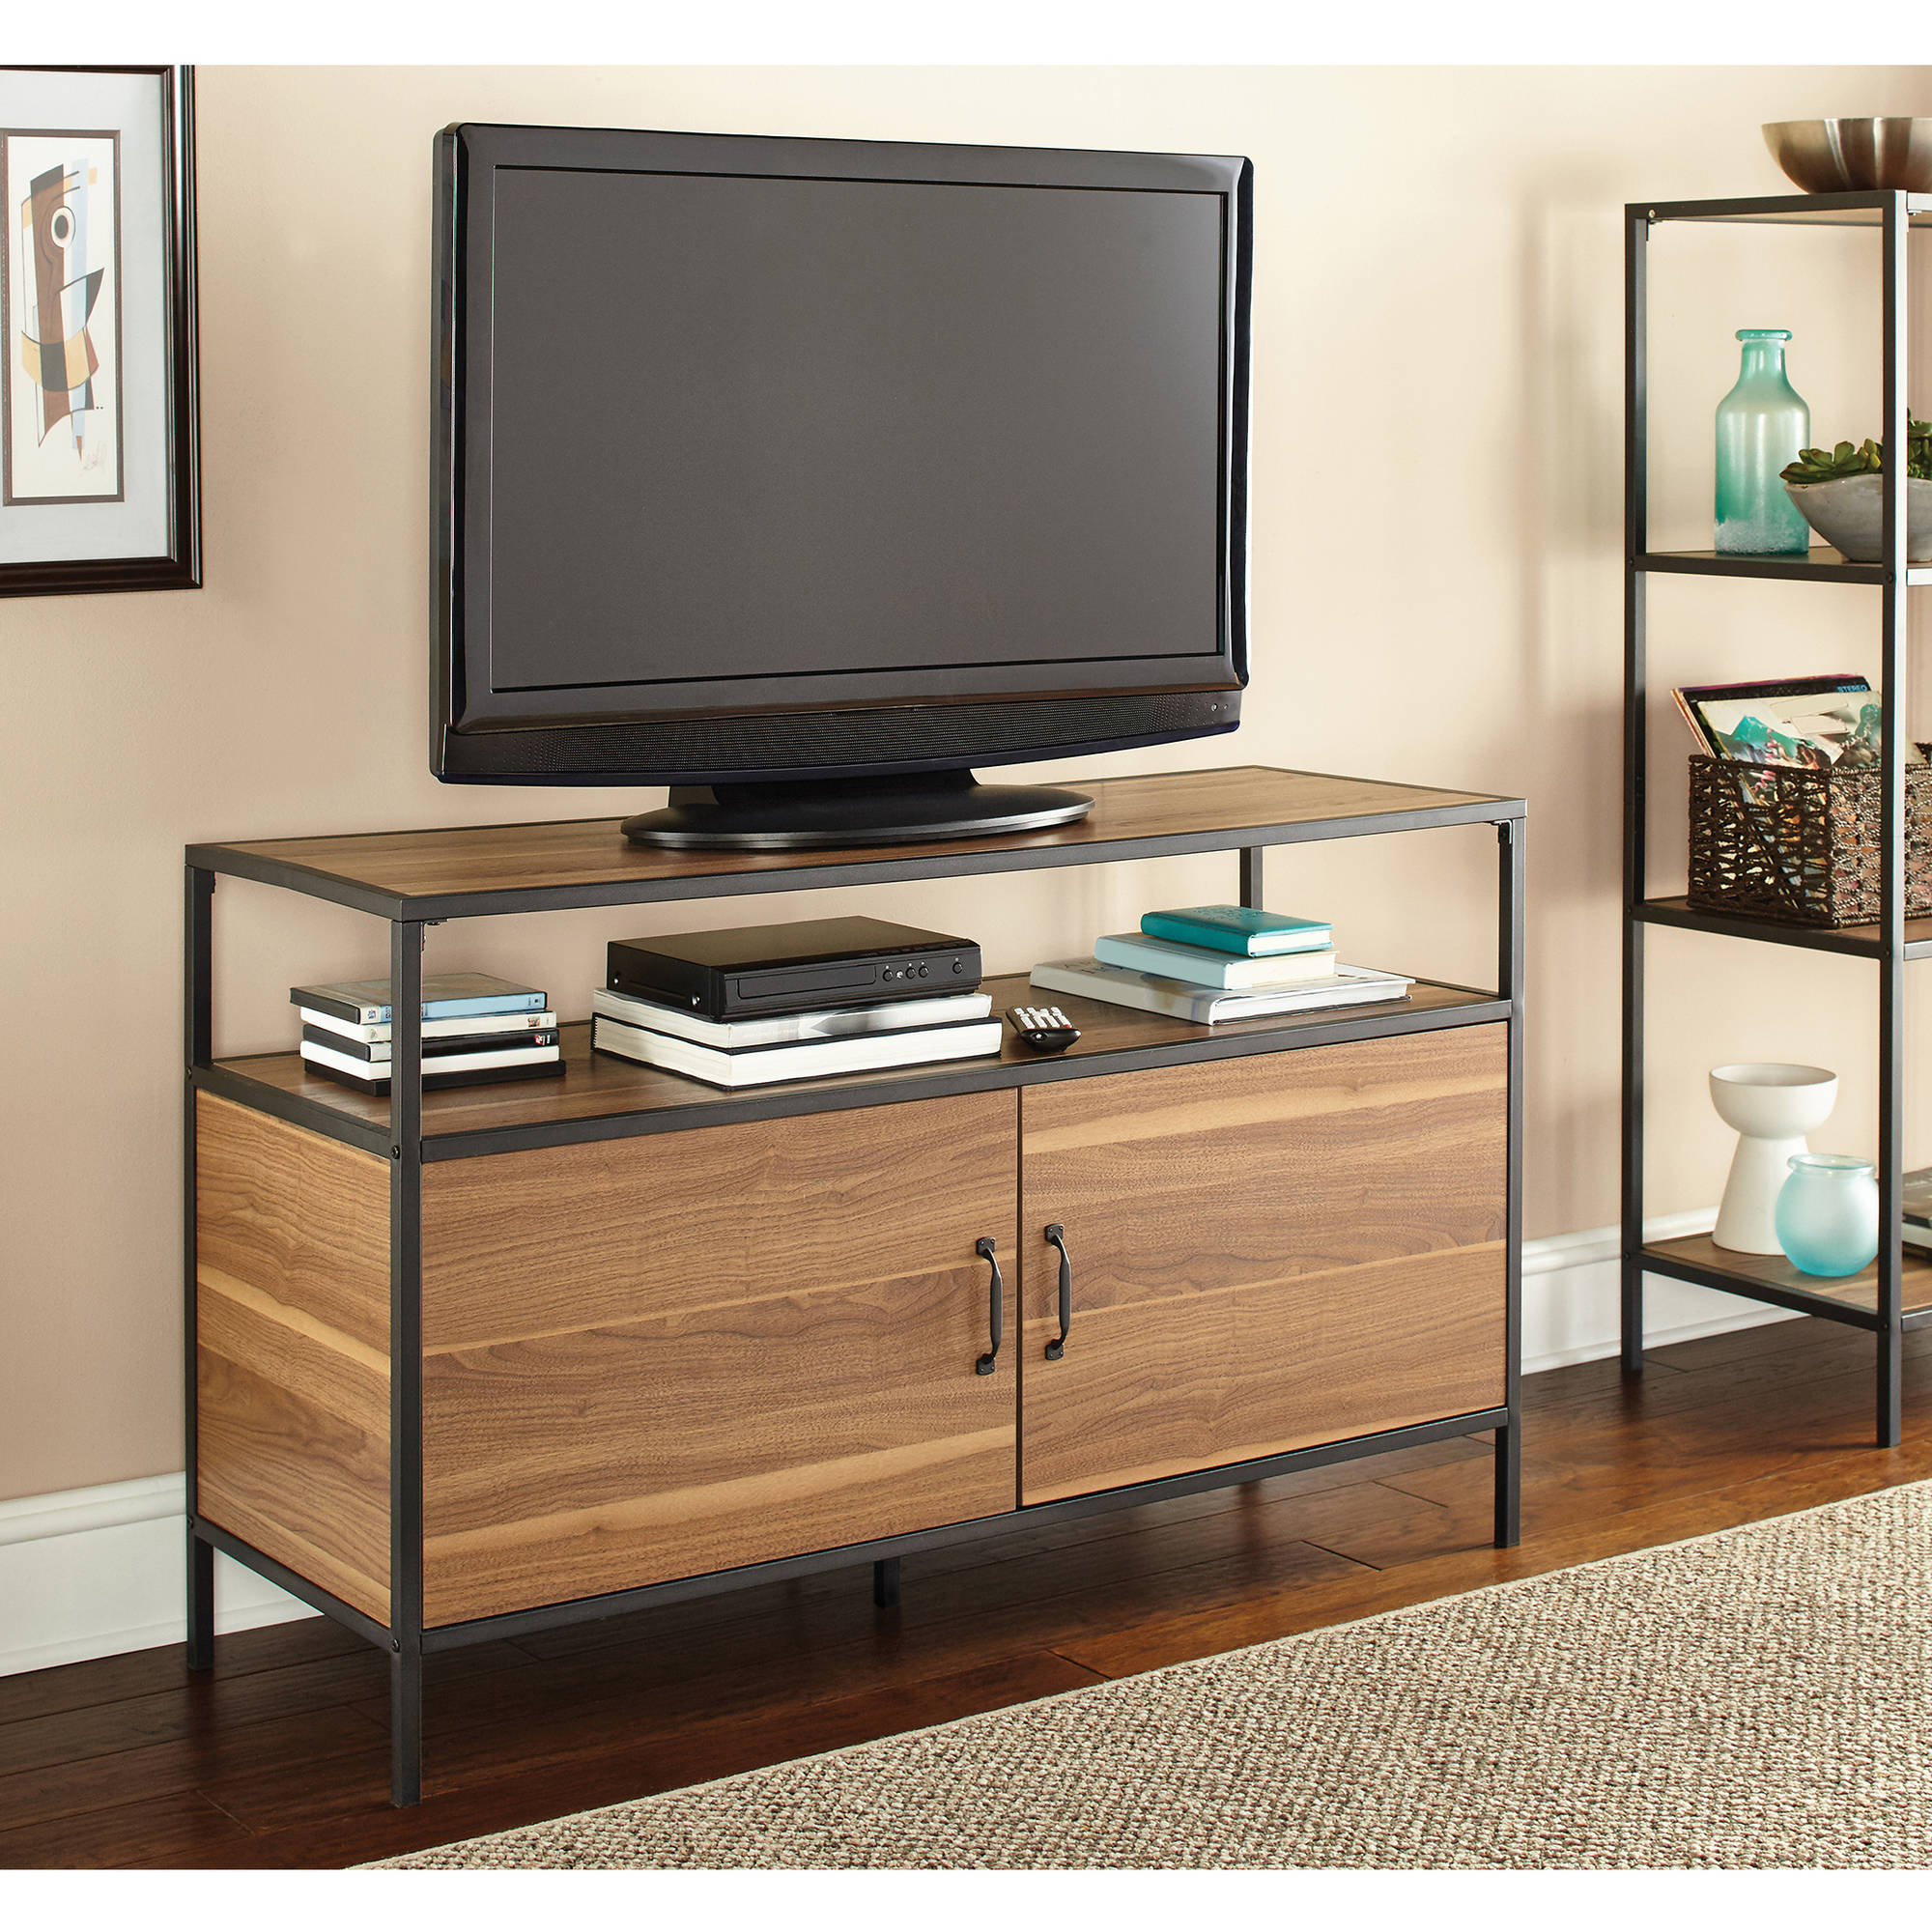 Mainstays Metro TV Stand for TVs up to 50", Warm Ash ...